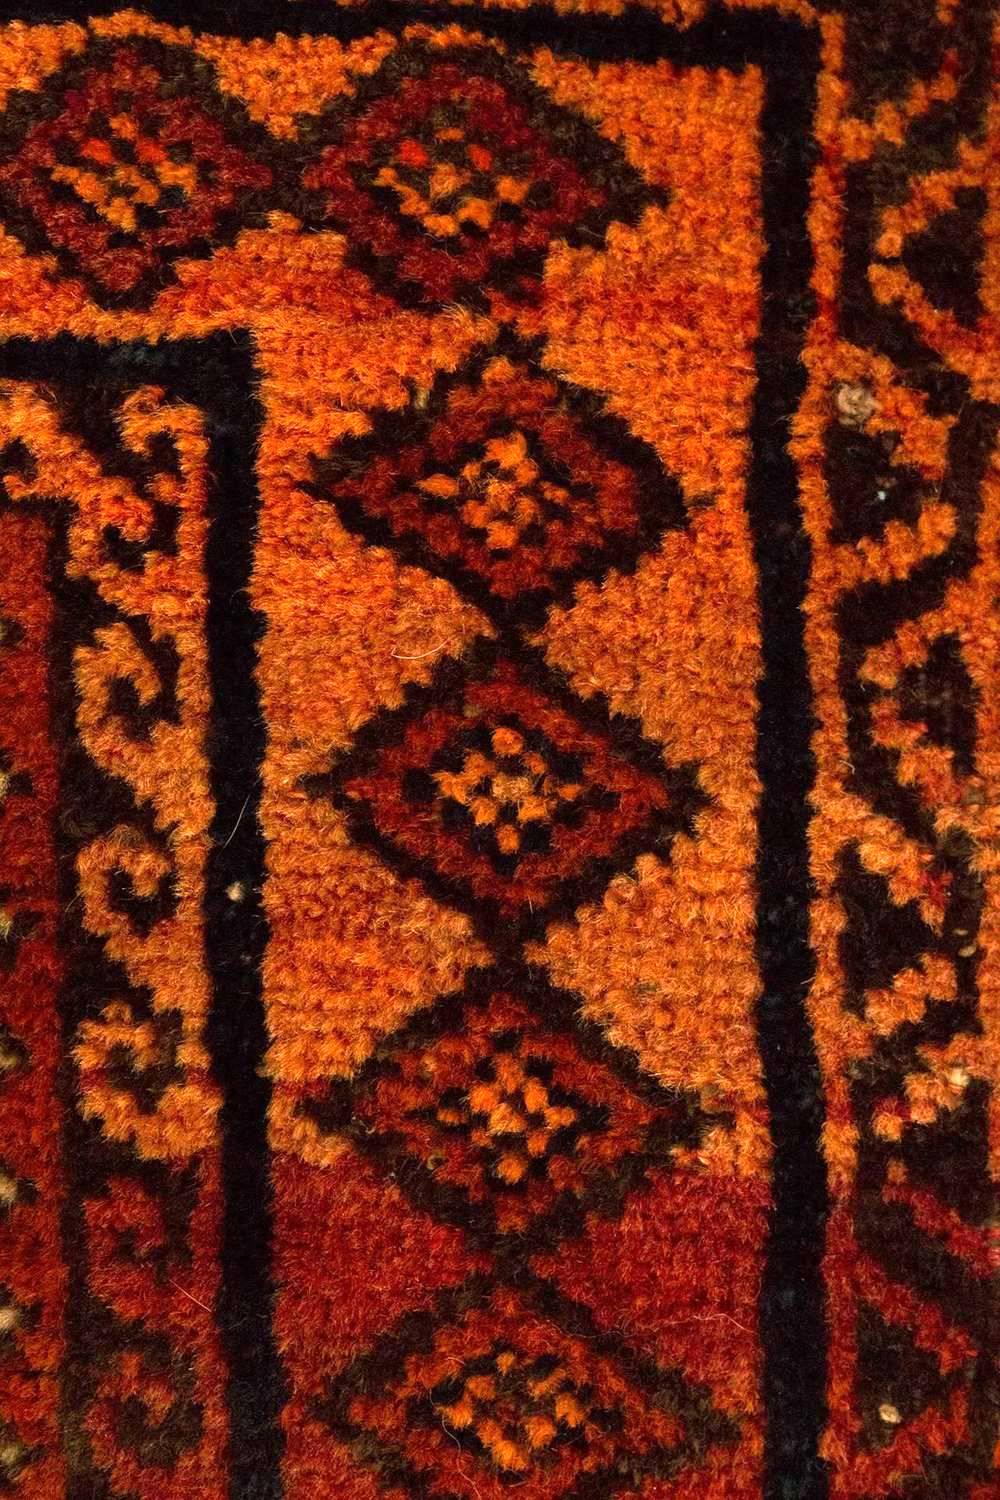 This tapestry is from Eastern Persia, woven by one of the tribal groups generally referred to as Baluch. This rug reflects all their characteristics: deep saturated colors, highly stylized geometric designs, wool construction and the handle of the